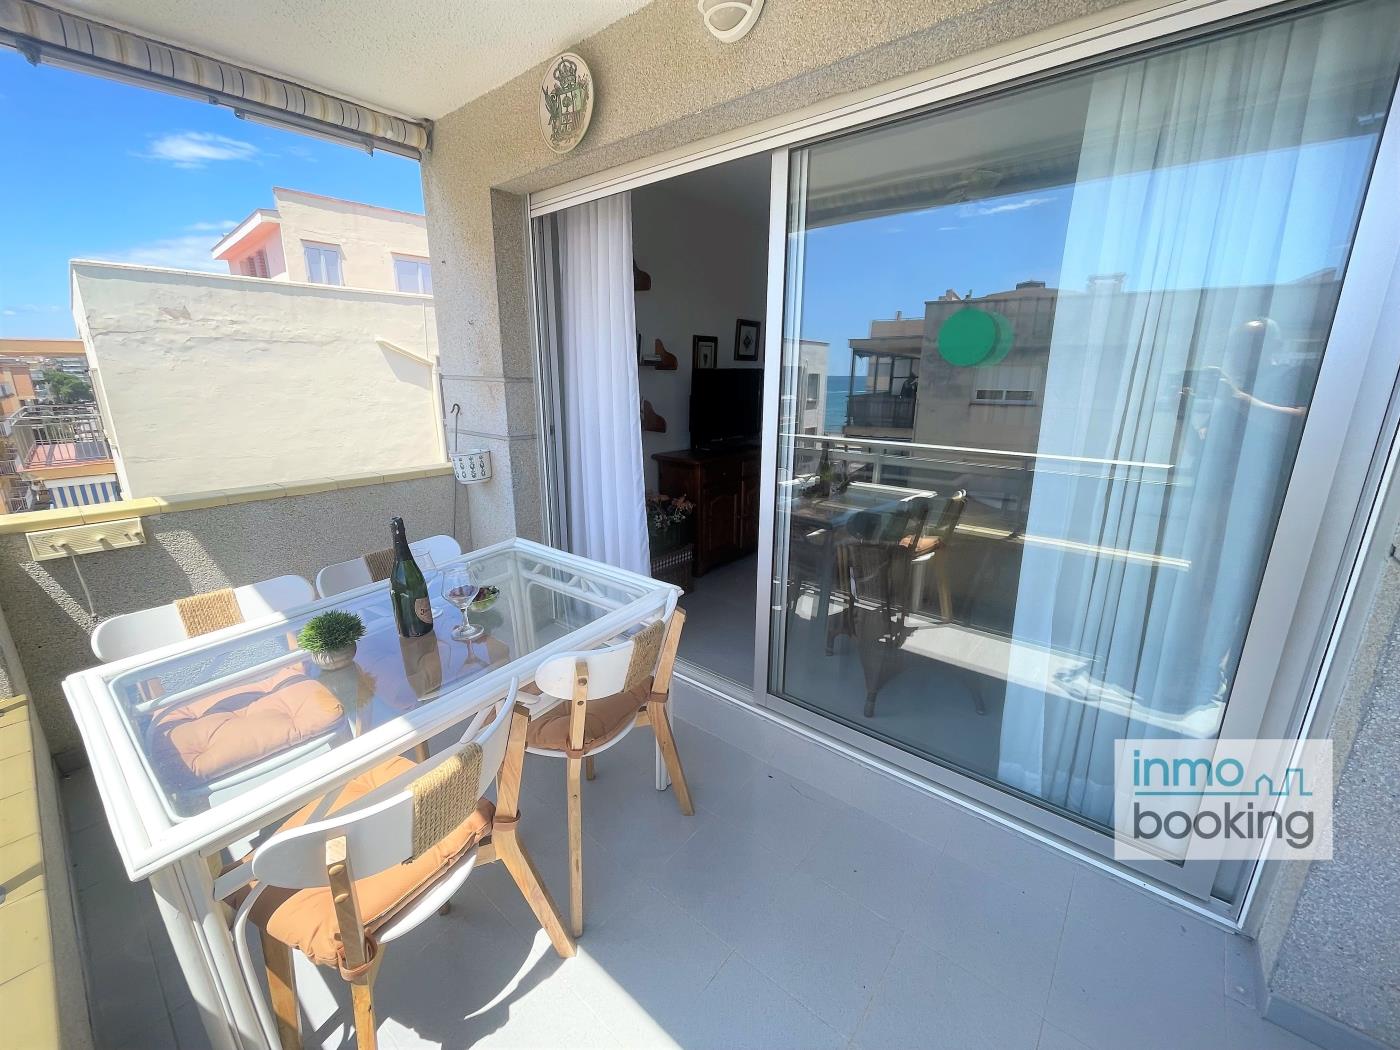 Diamant Apartment, with parking and close to the beach. in Salou